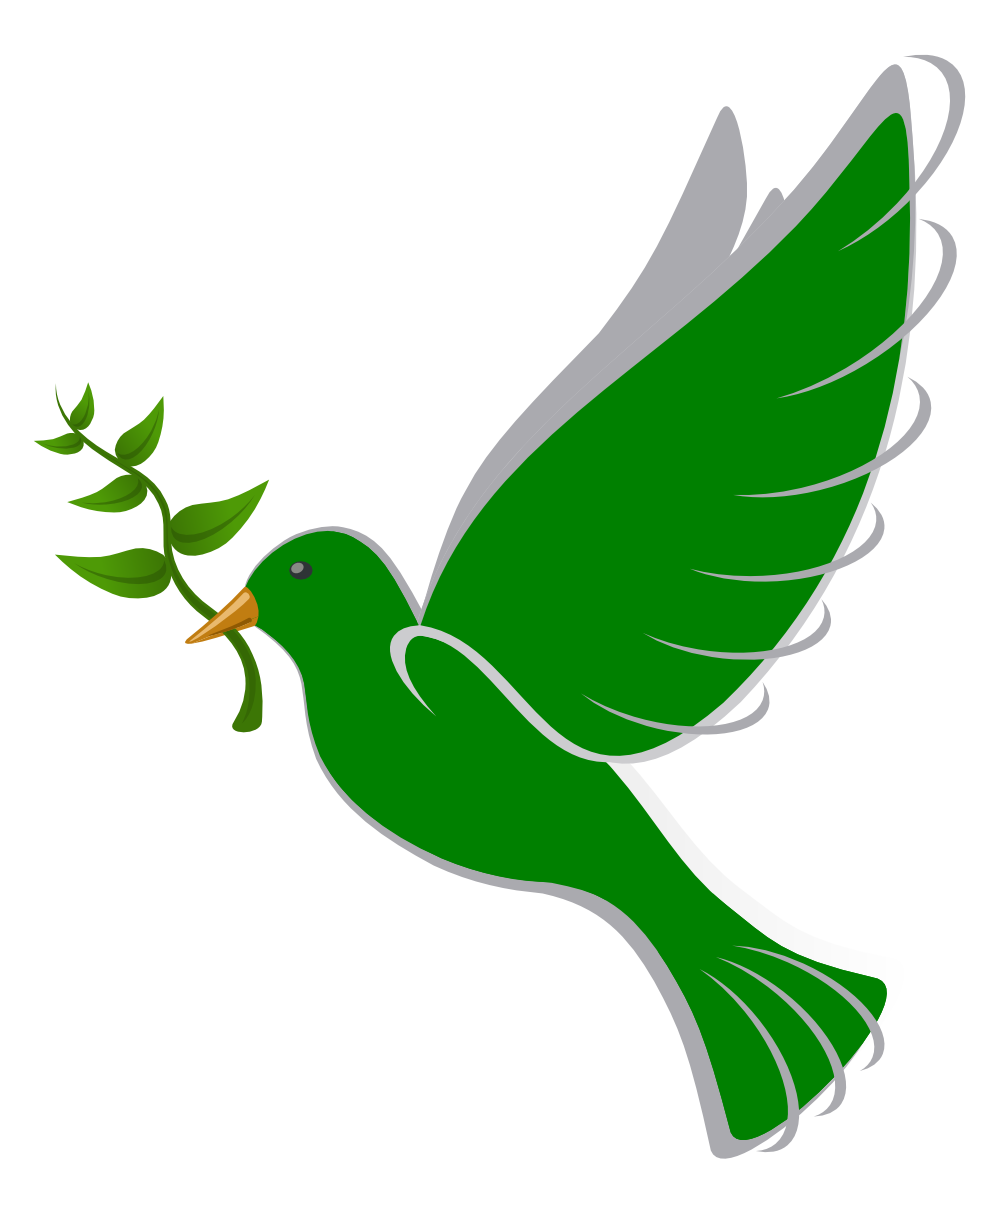 Lybia Peace Dove Peace 3 peacesymbol.org openclipart.org commons ...